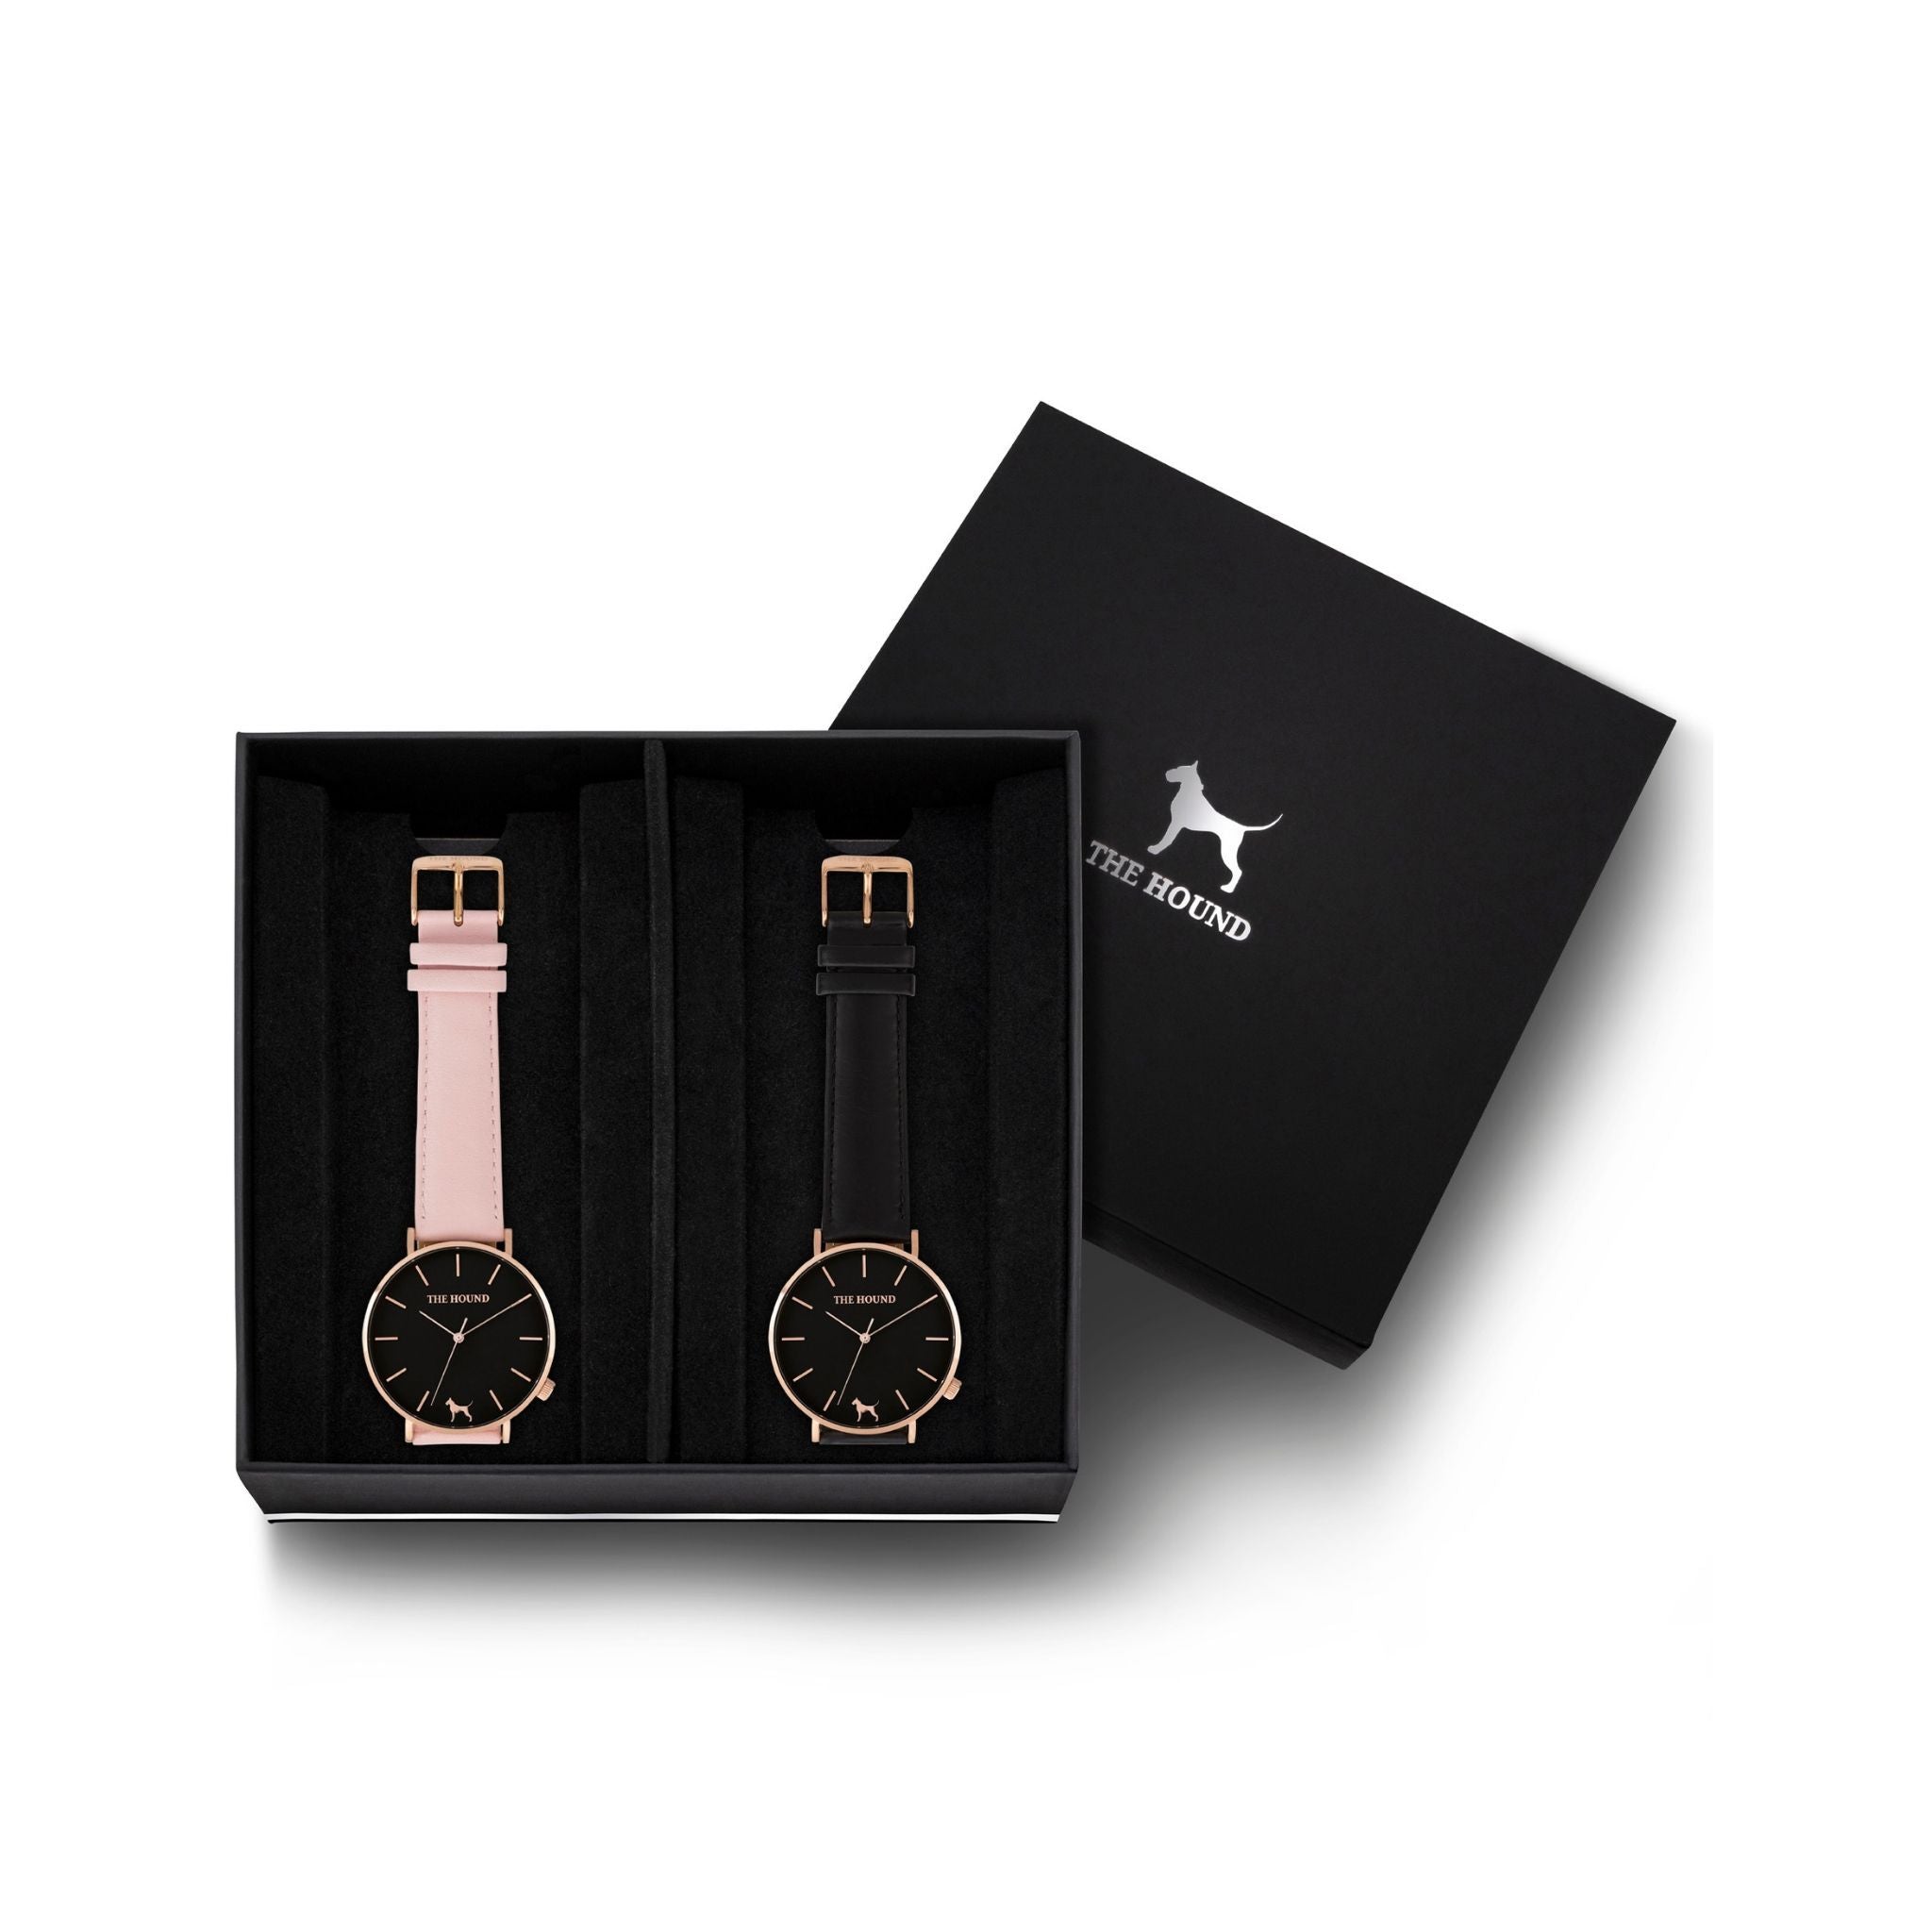 Custom gift set - Rose gold and black watch with stitched blush pink genuine leather band and a rose gold and black watch with stitched black genuine leather band